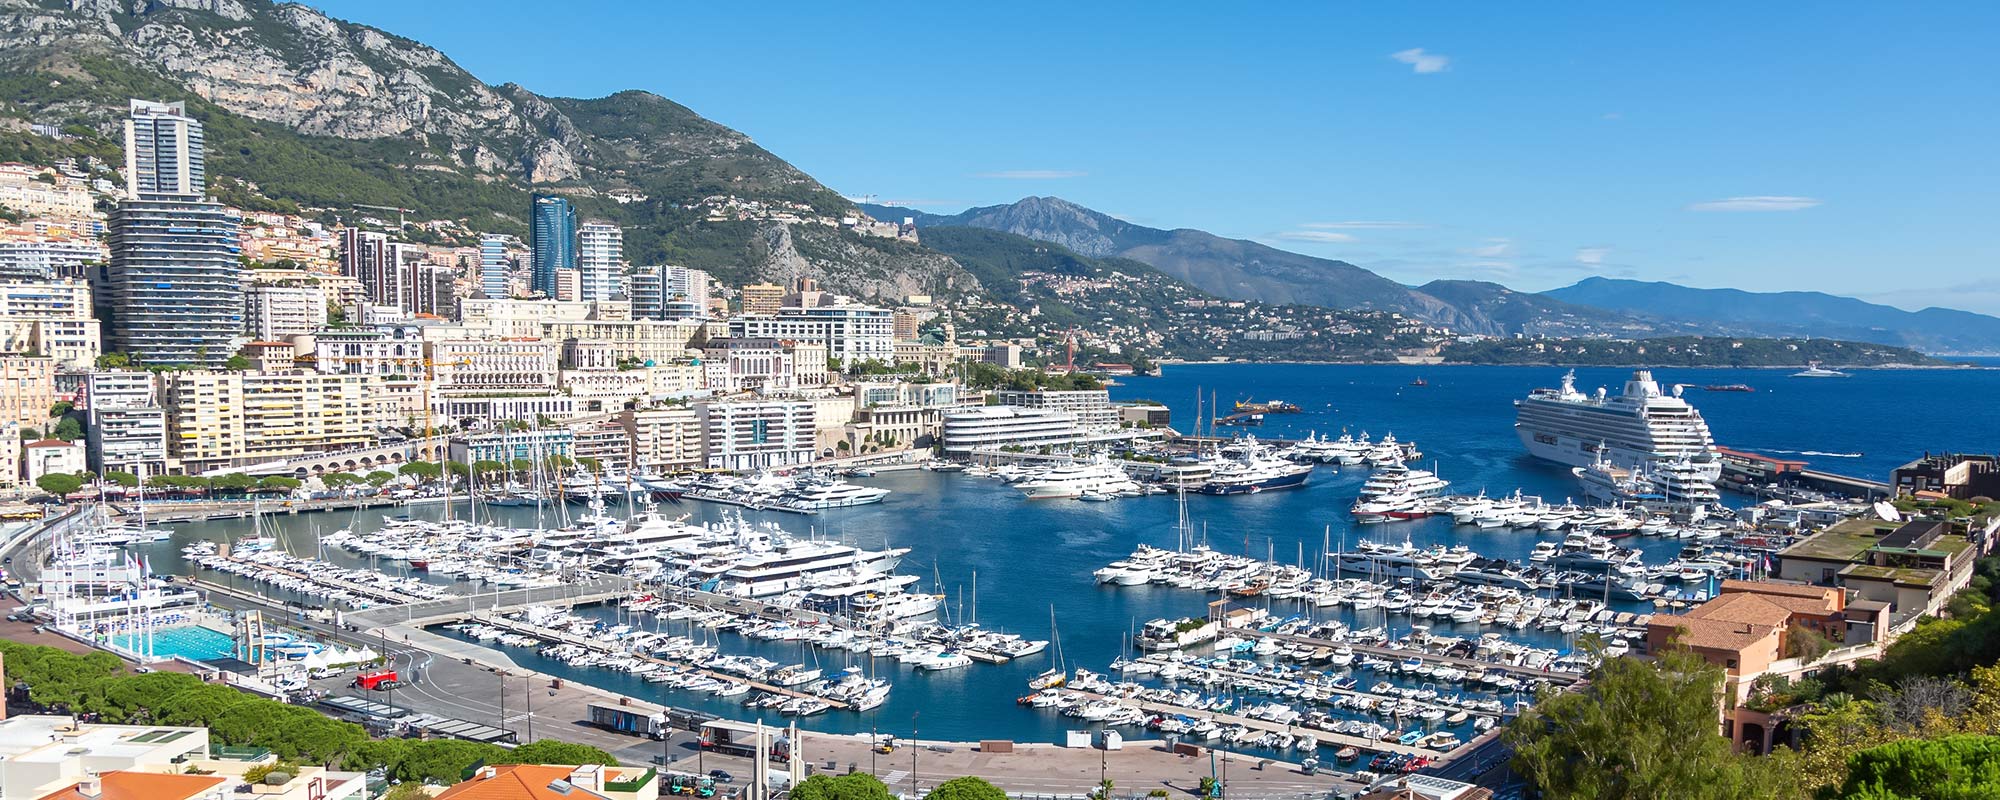 Monaco Prices: Hotels, Attractions, Restaurants, Food and Drink Costs ...